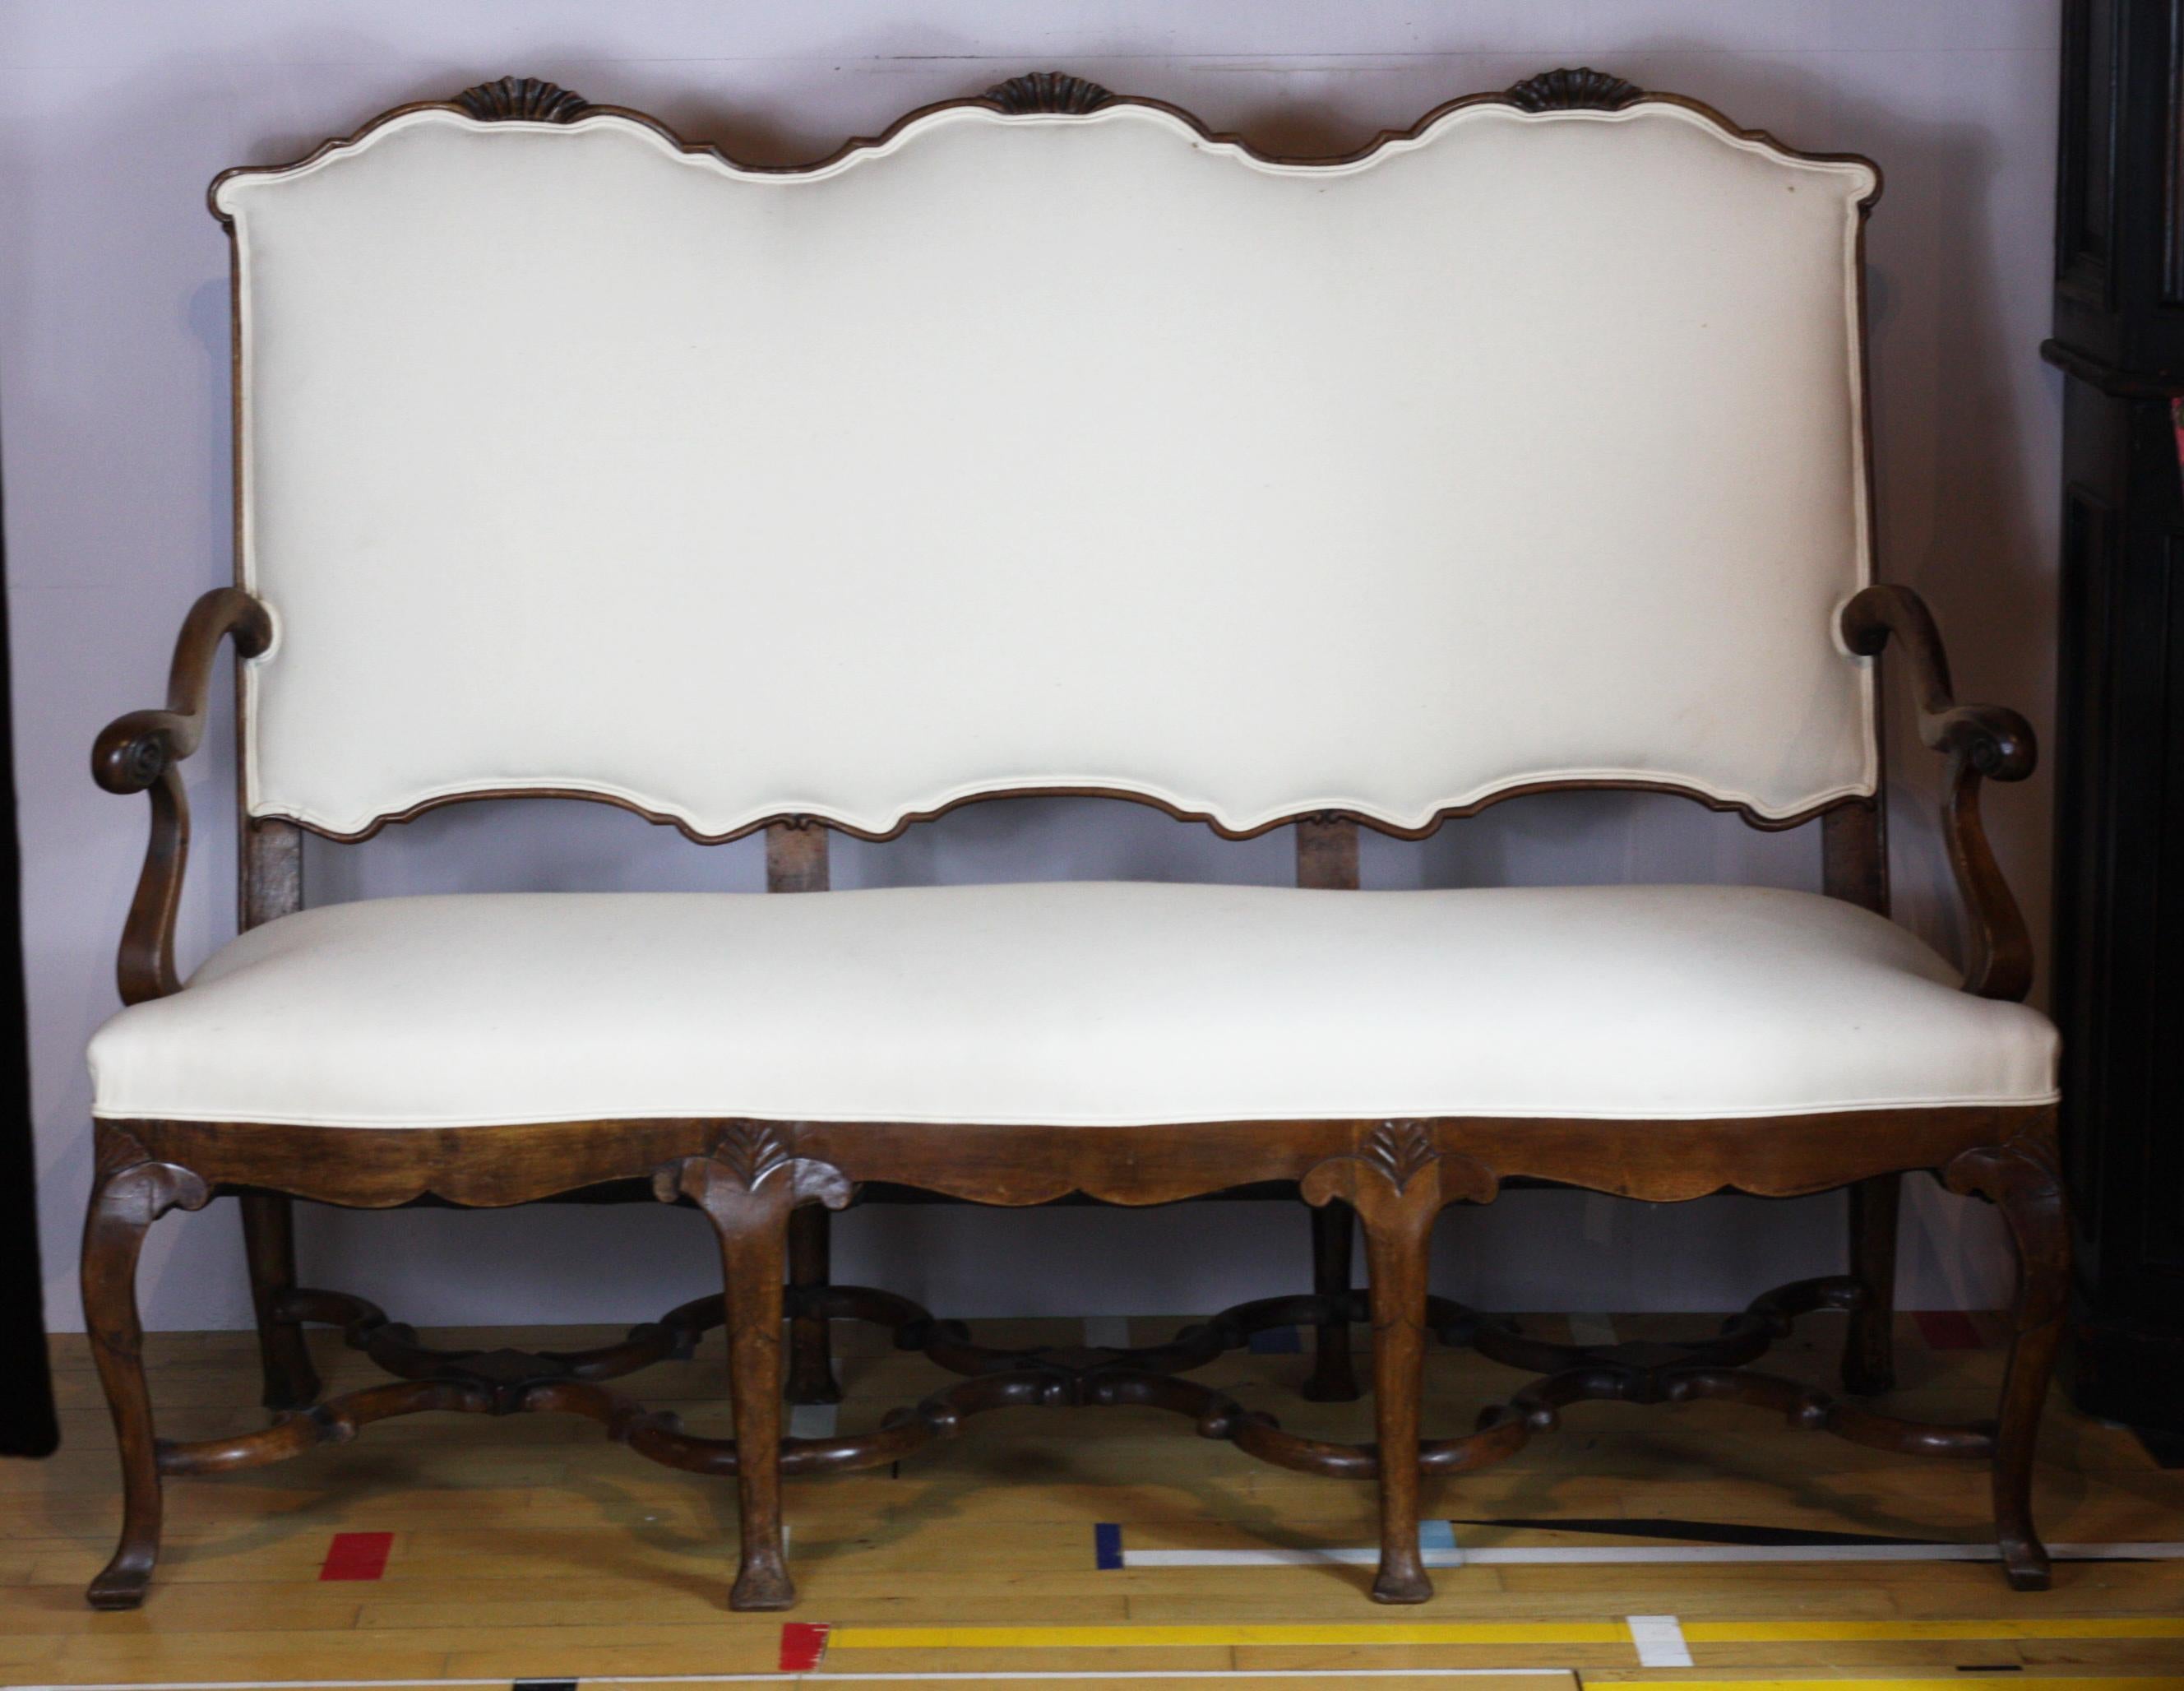 Edwardian solid walnut French sofa, raised on 8 cabriole legs connected with elegant carved stretchers, with repeated shell motif on top rail and scrolling on the walnut arms circa 1900, in superb condition, recently
re-upholstered in calico.